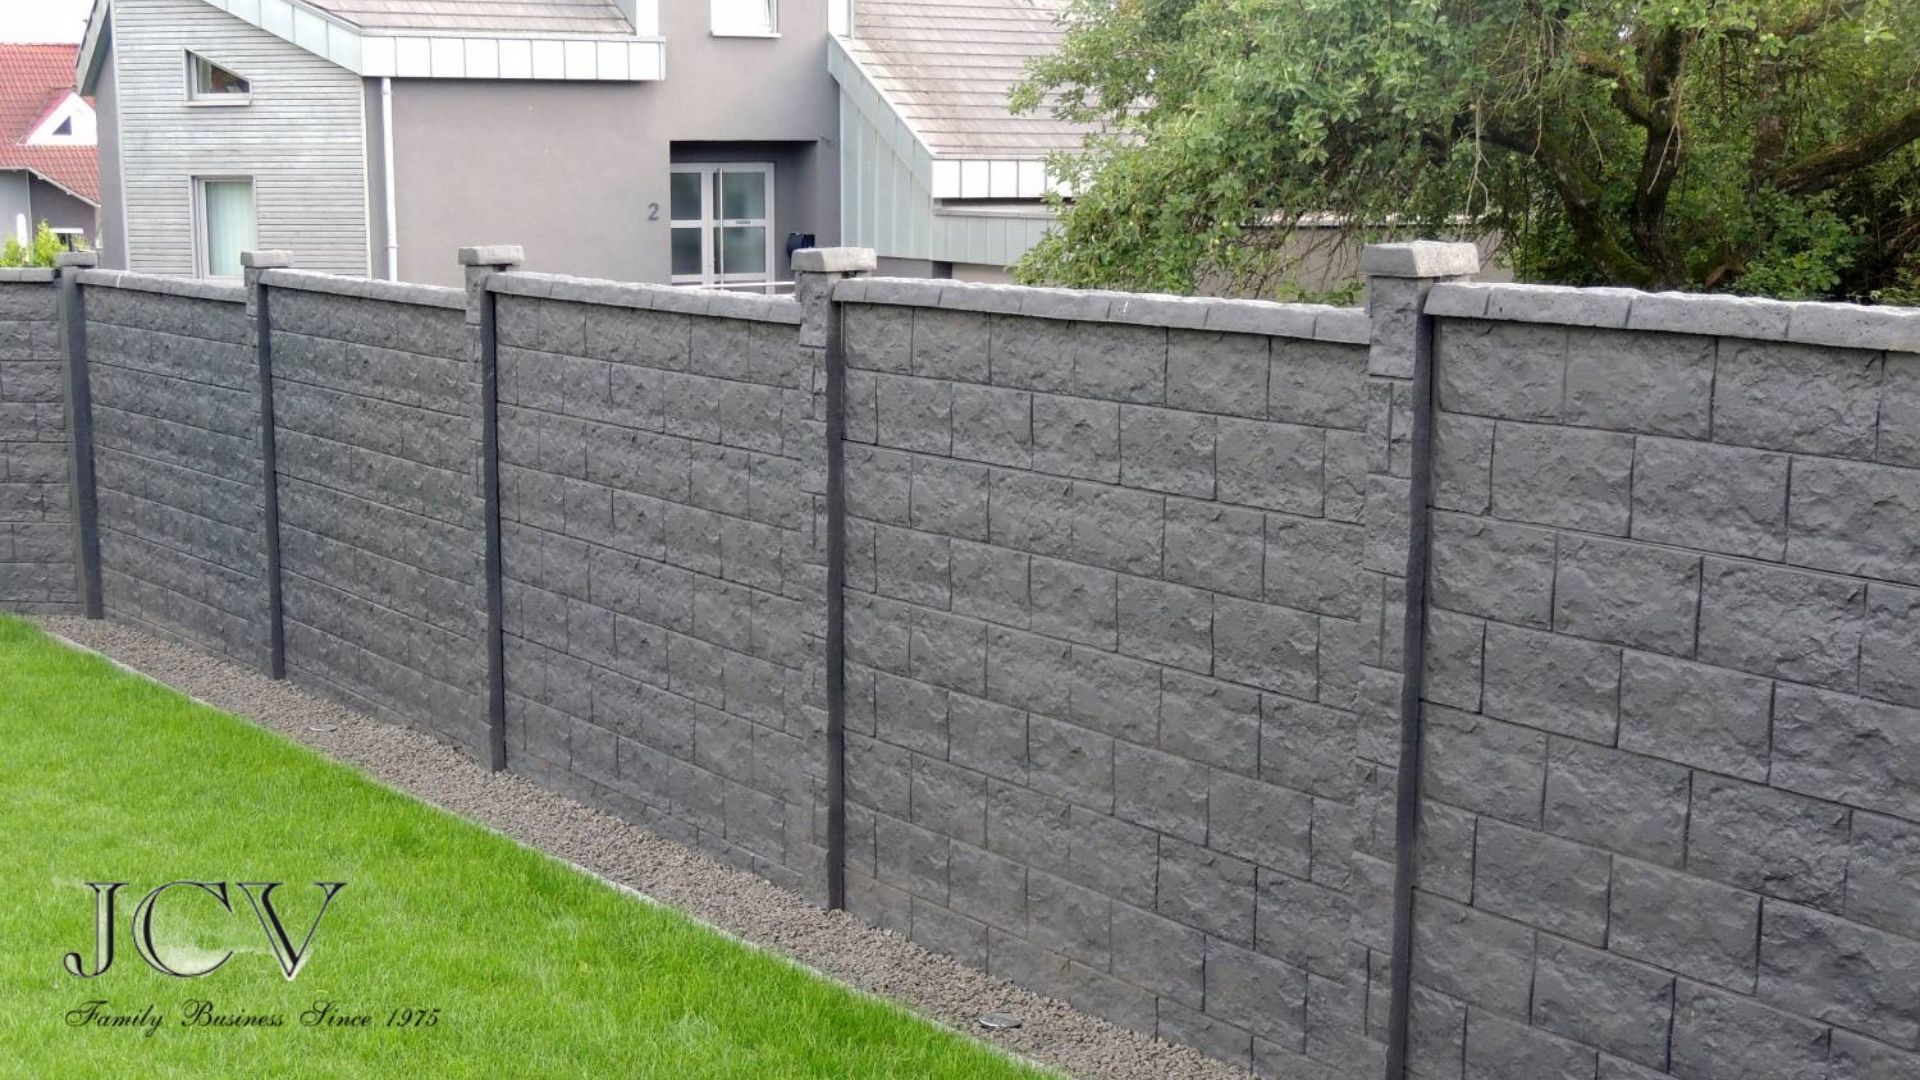 Beautiful Concrete Fencing Can Transform Your Home’s Exterior Looks! | JCV